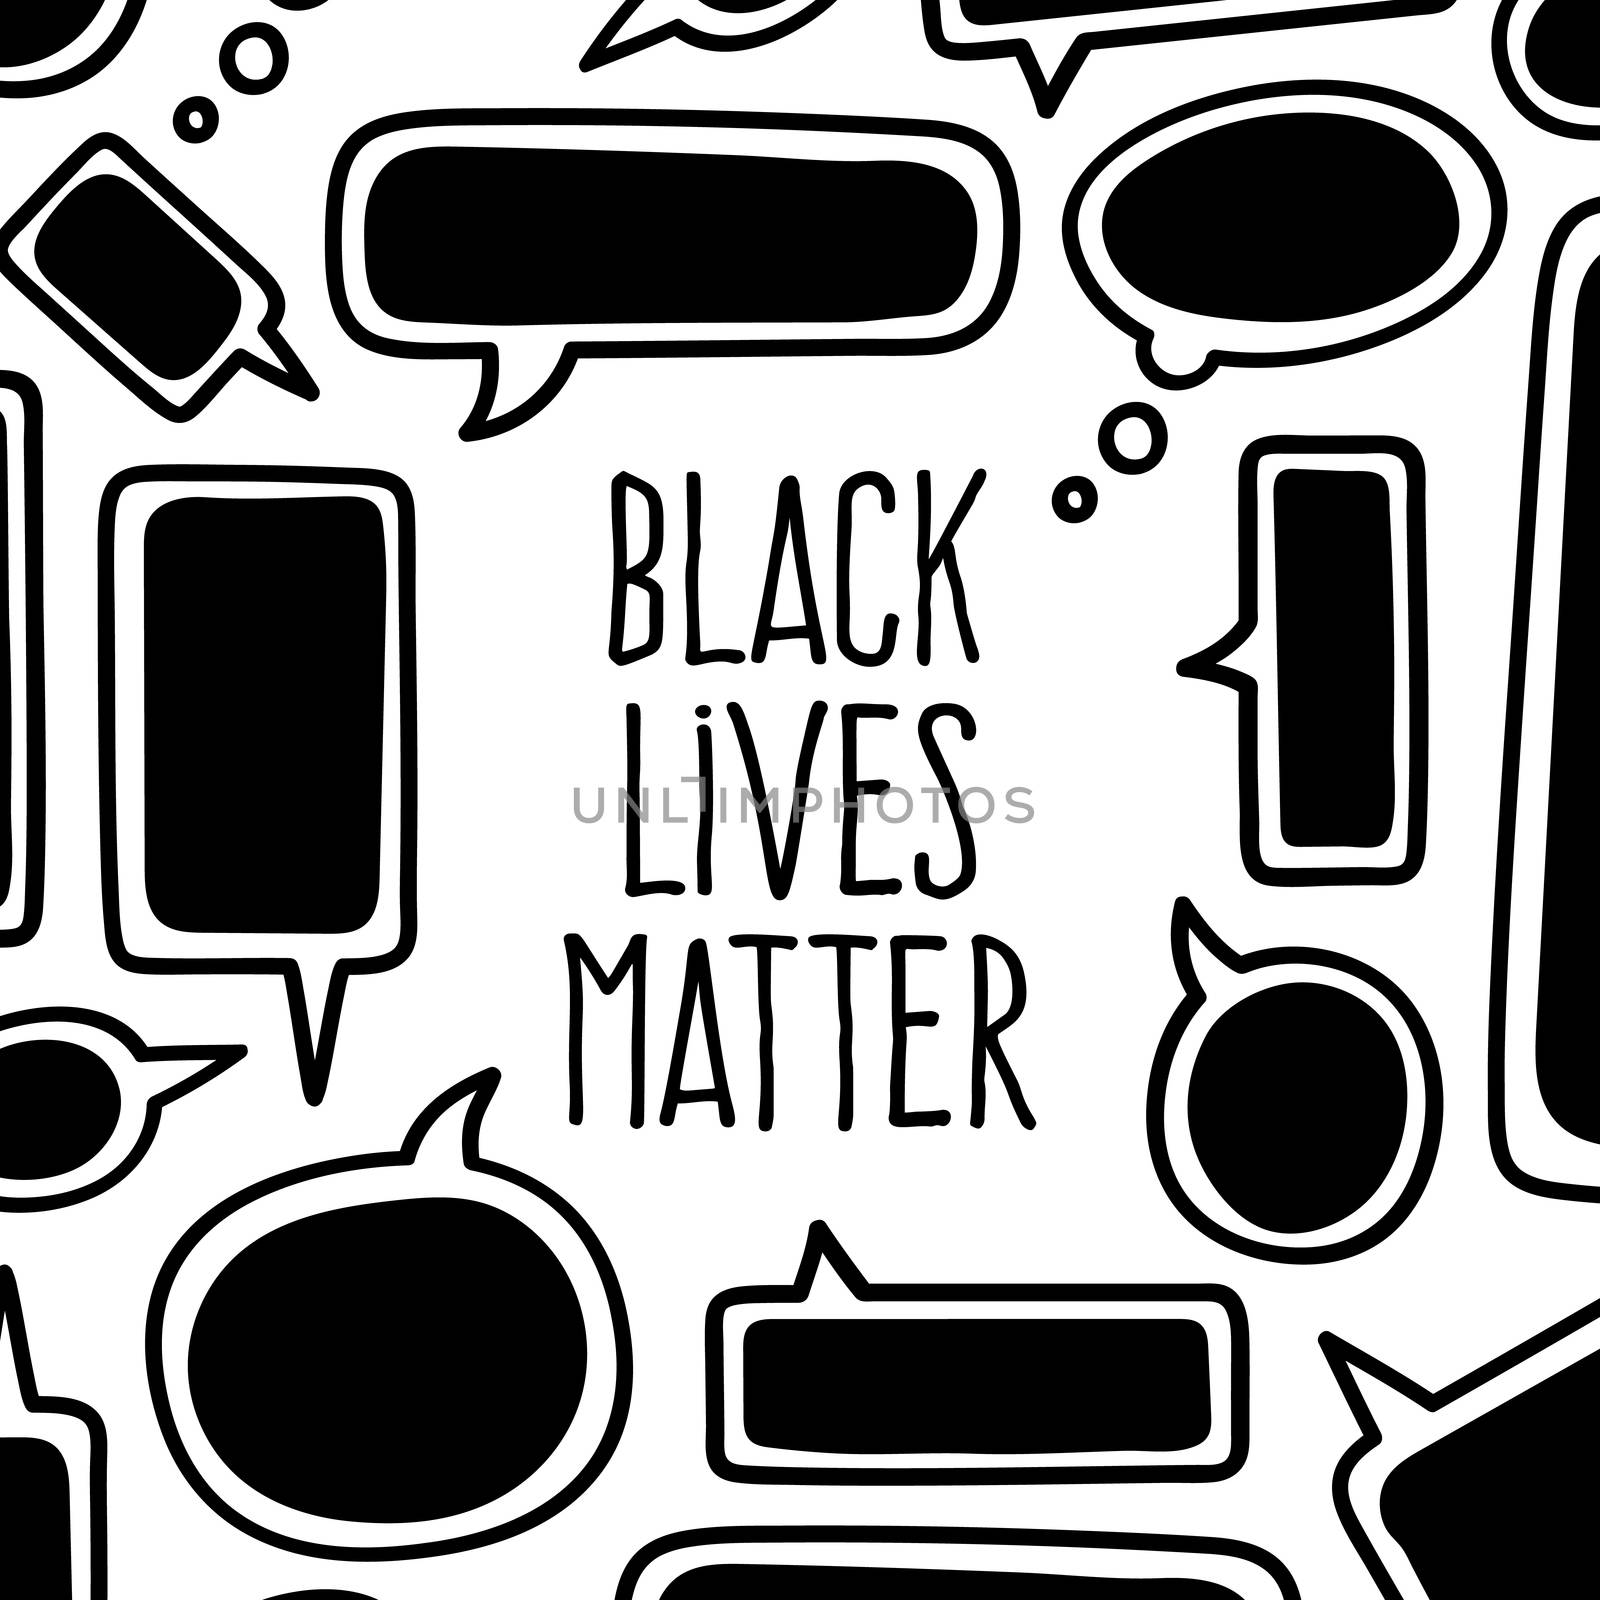 Black Lives Matter. Chat bubbles Protest Banner about Human Right of Black People in U.S. America. Vector Illustration.